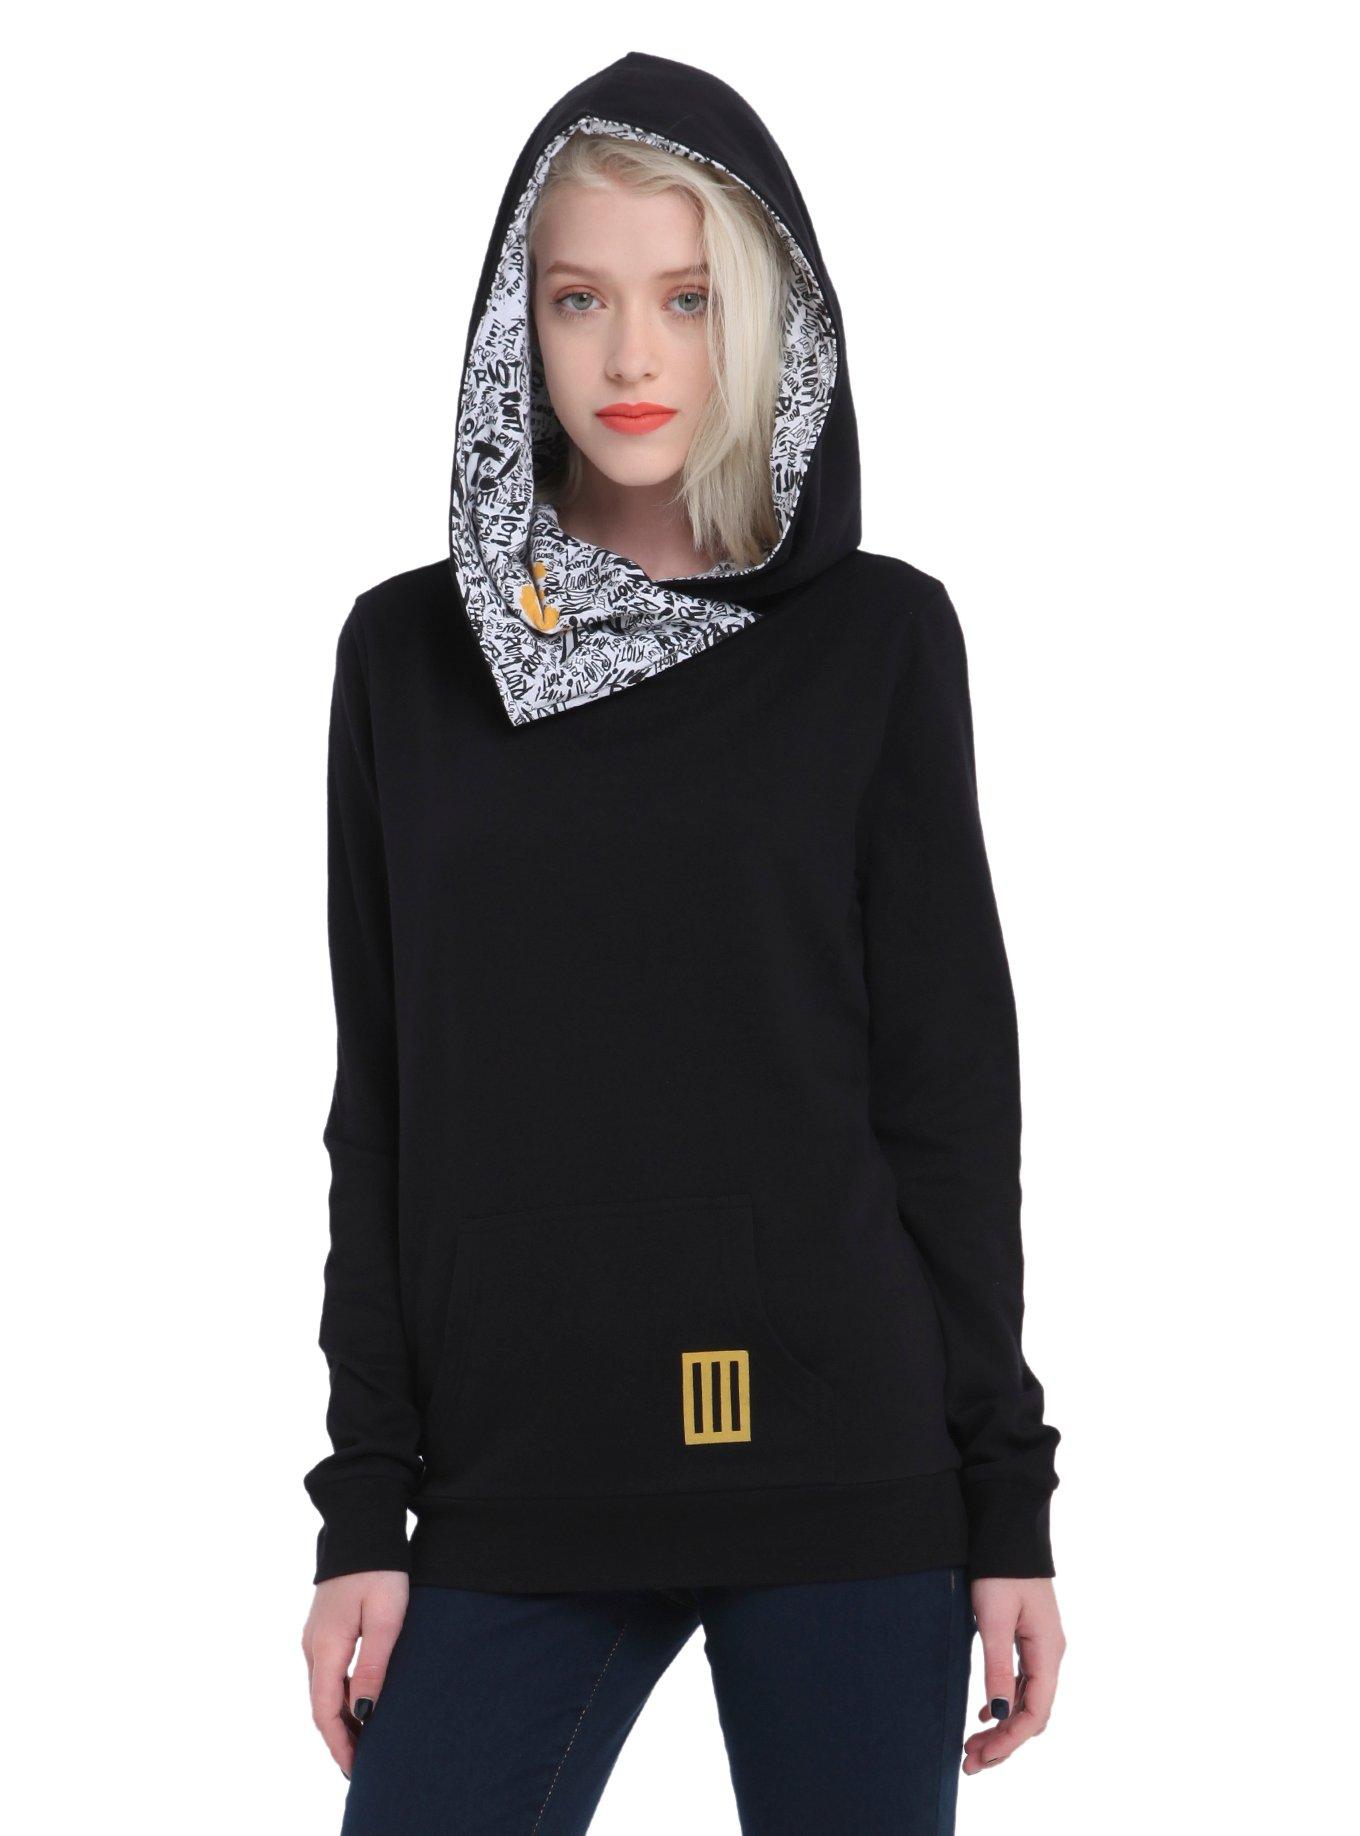 Paramore Riot! Cowl Neck Girls Pullover Hoodie | Hot Topic